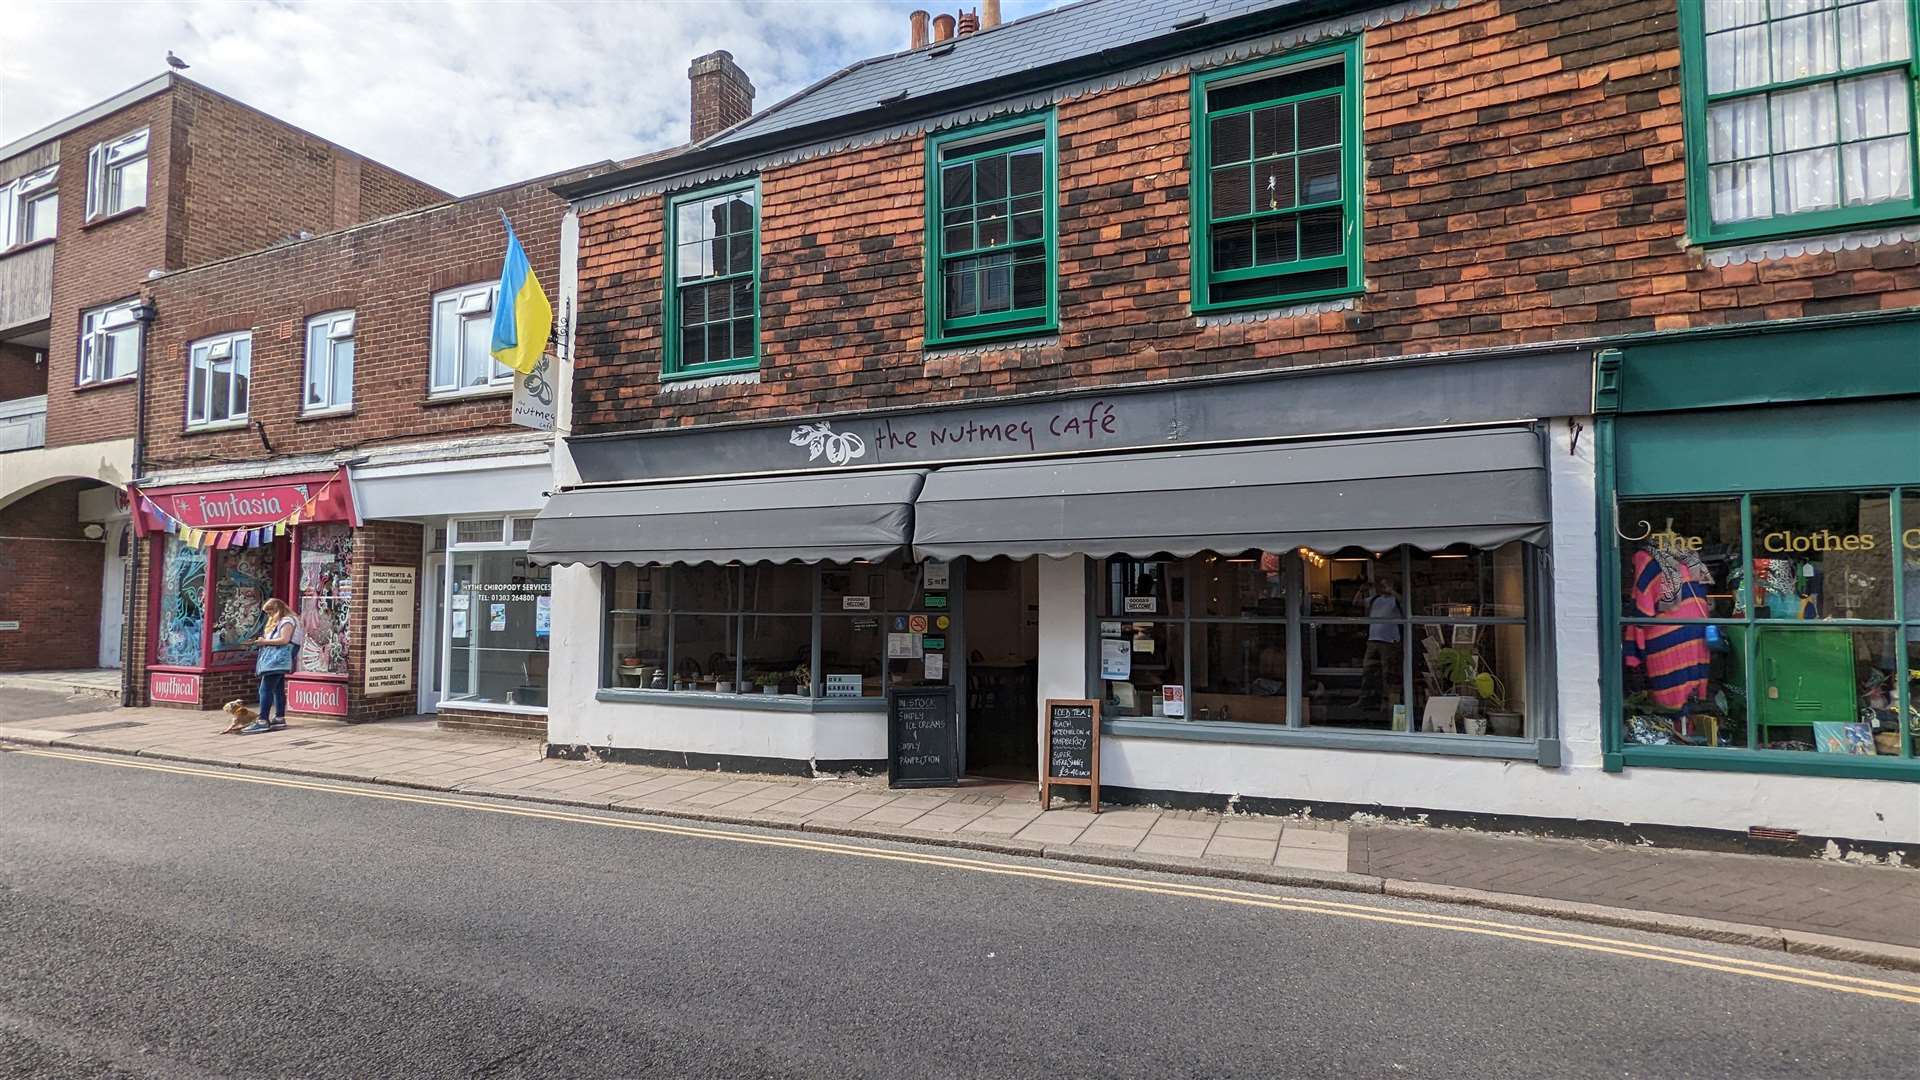 The popular, cosy Nutmeg cafe on the High Street in Hythe - but will it survive the winter?